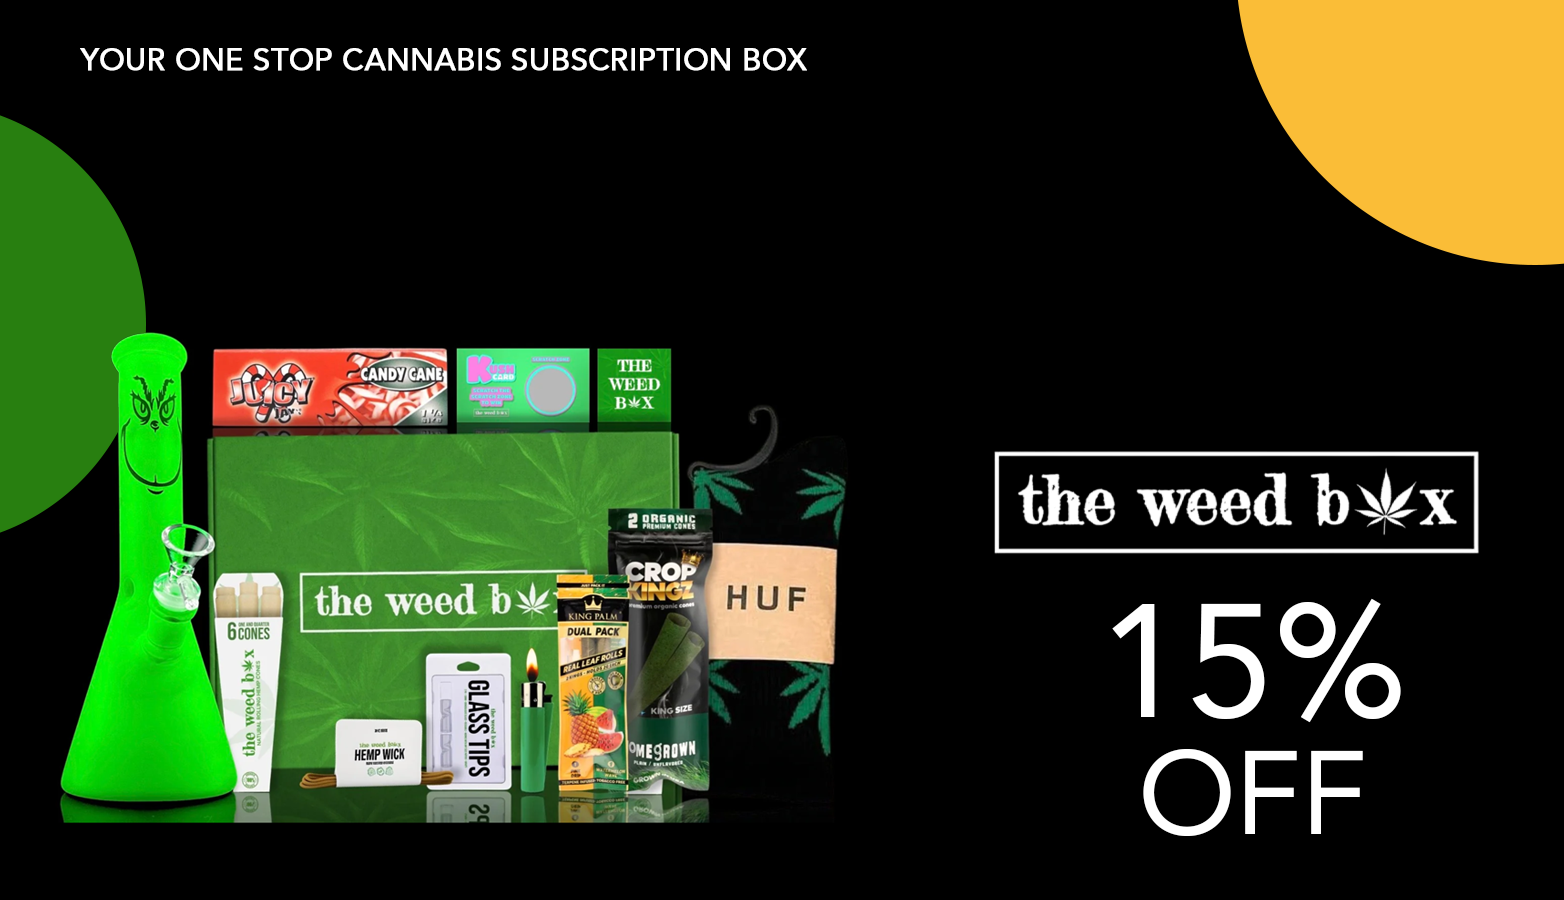 The Weed Box Coupon Code